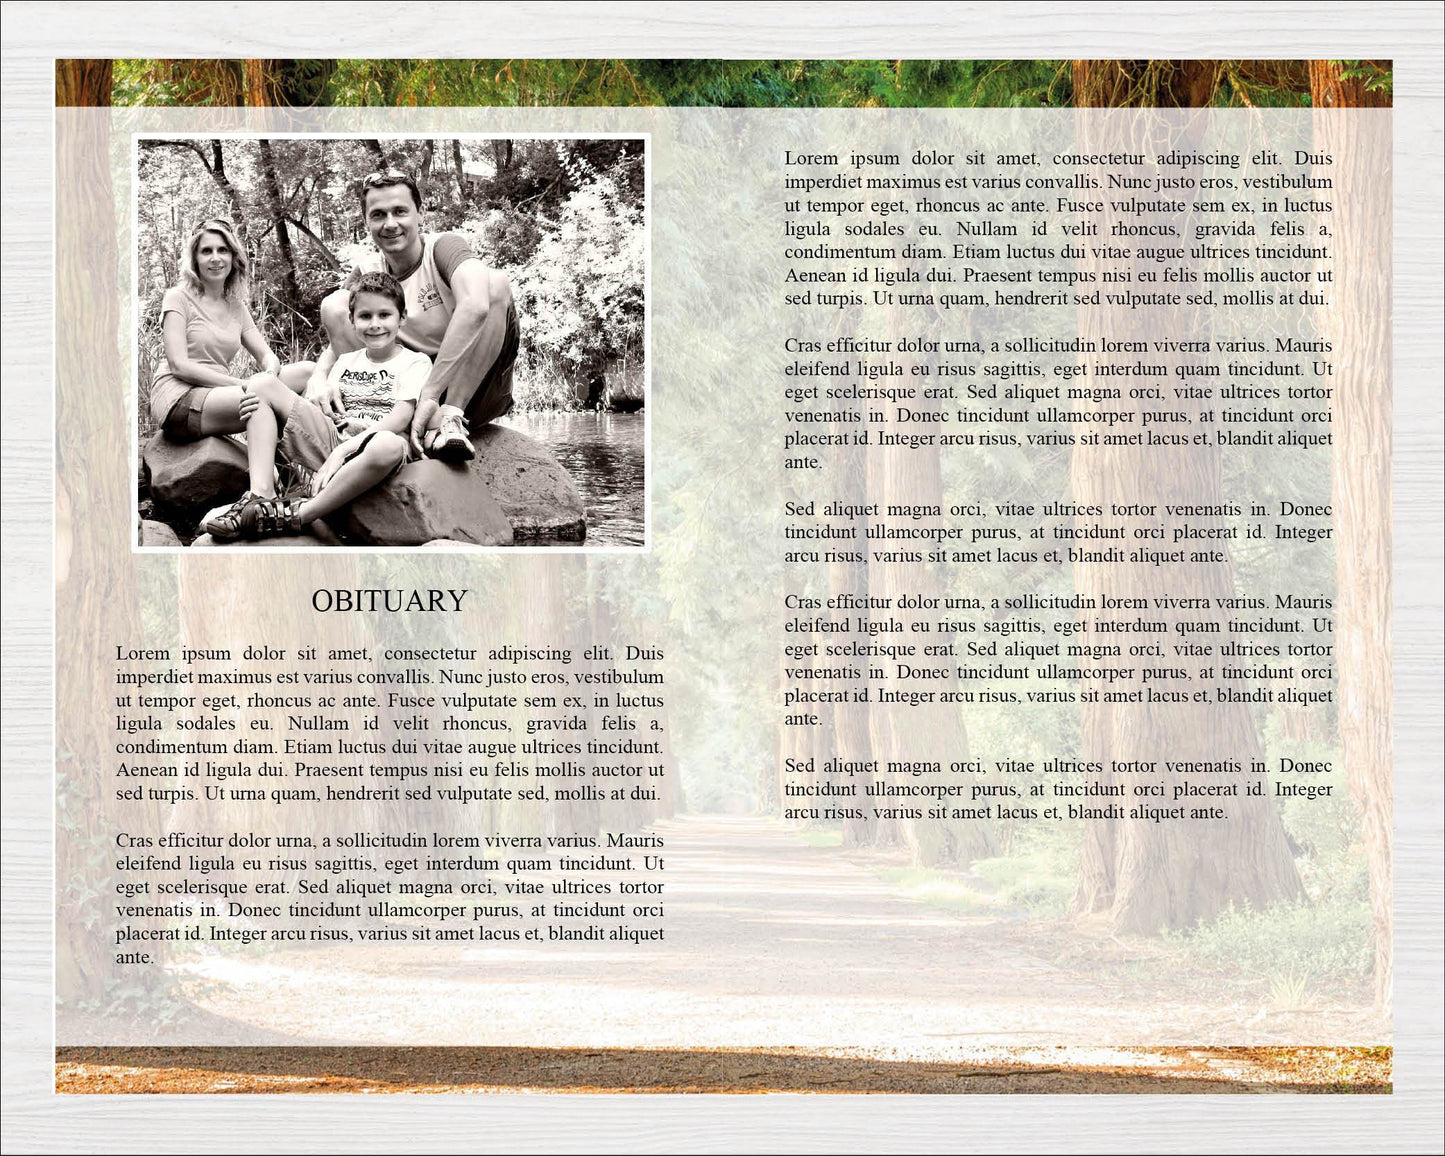 8 Page Woodland Funeral Program Template